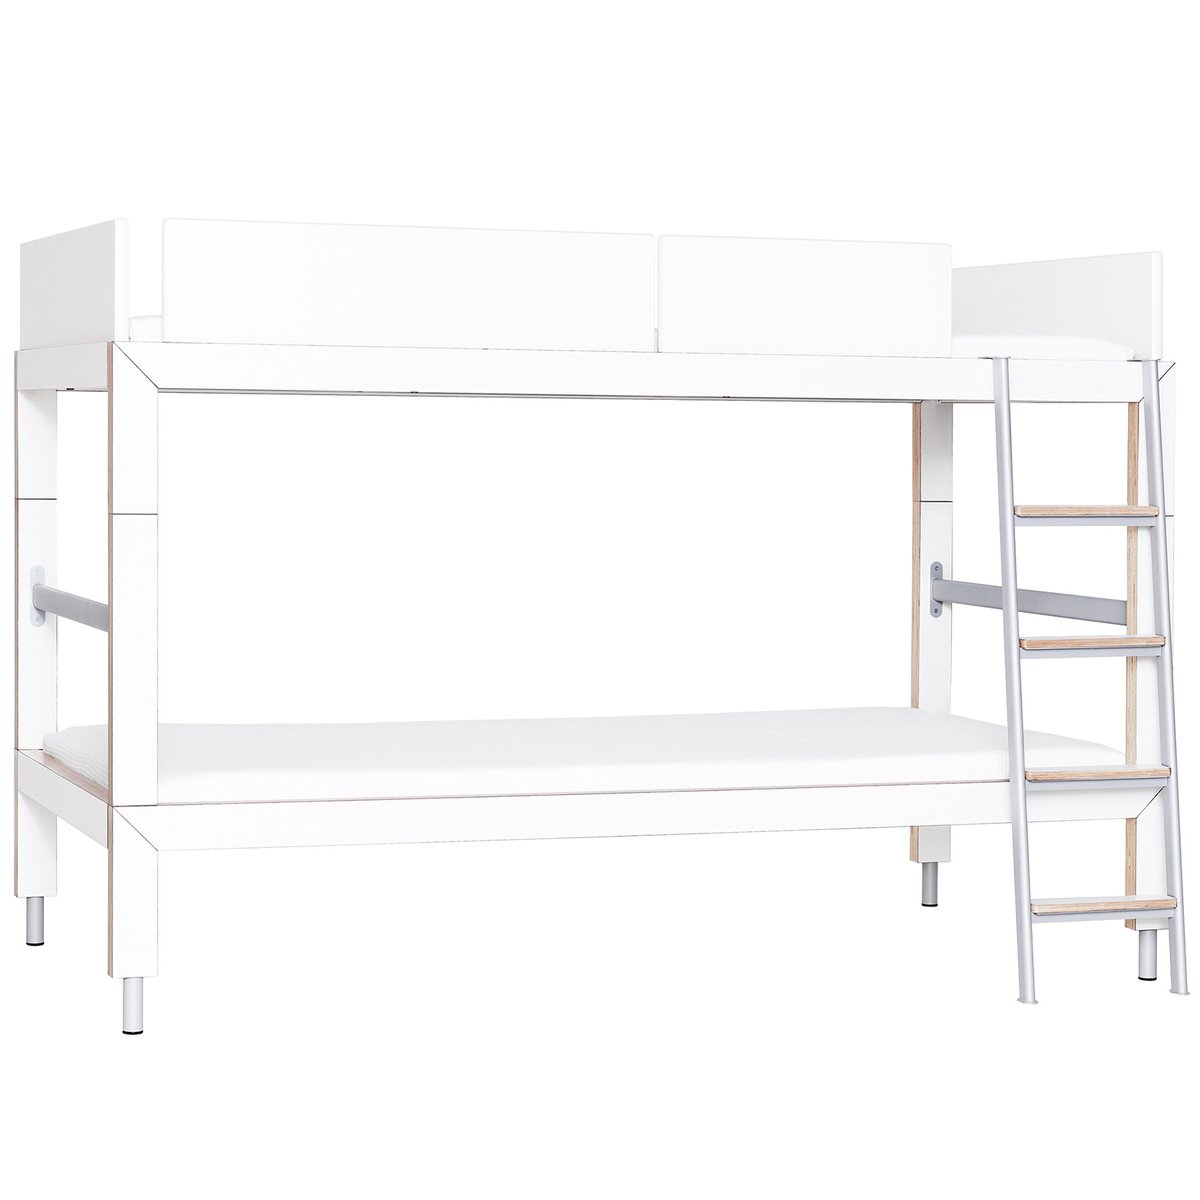 Lundia Lofty Bunk Bed Finnish Design, How Much Do Bunk Beds Cost